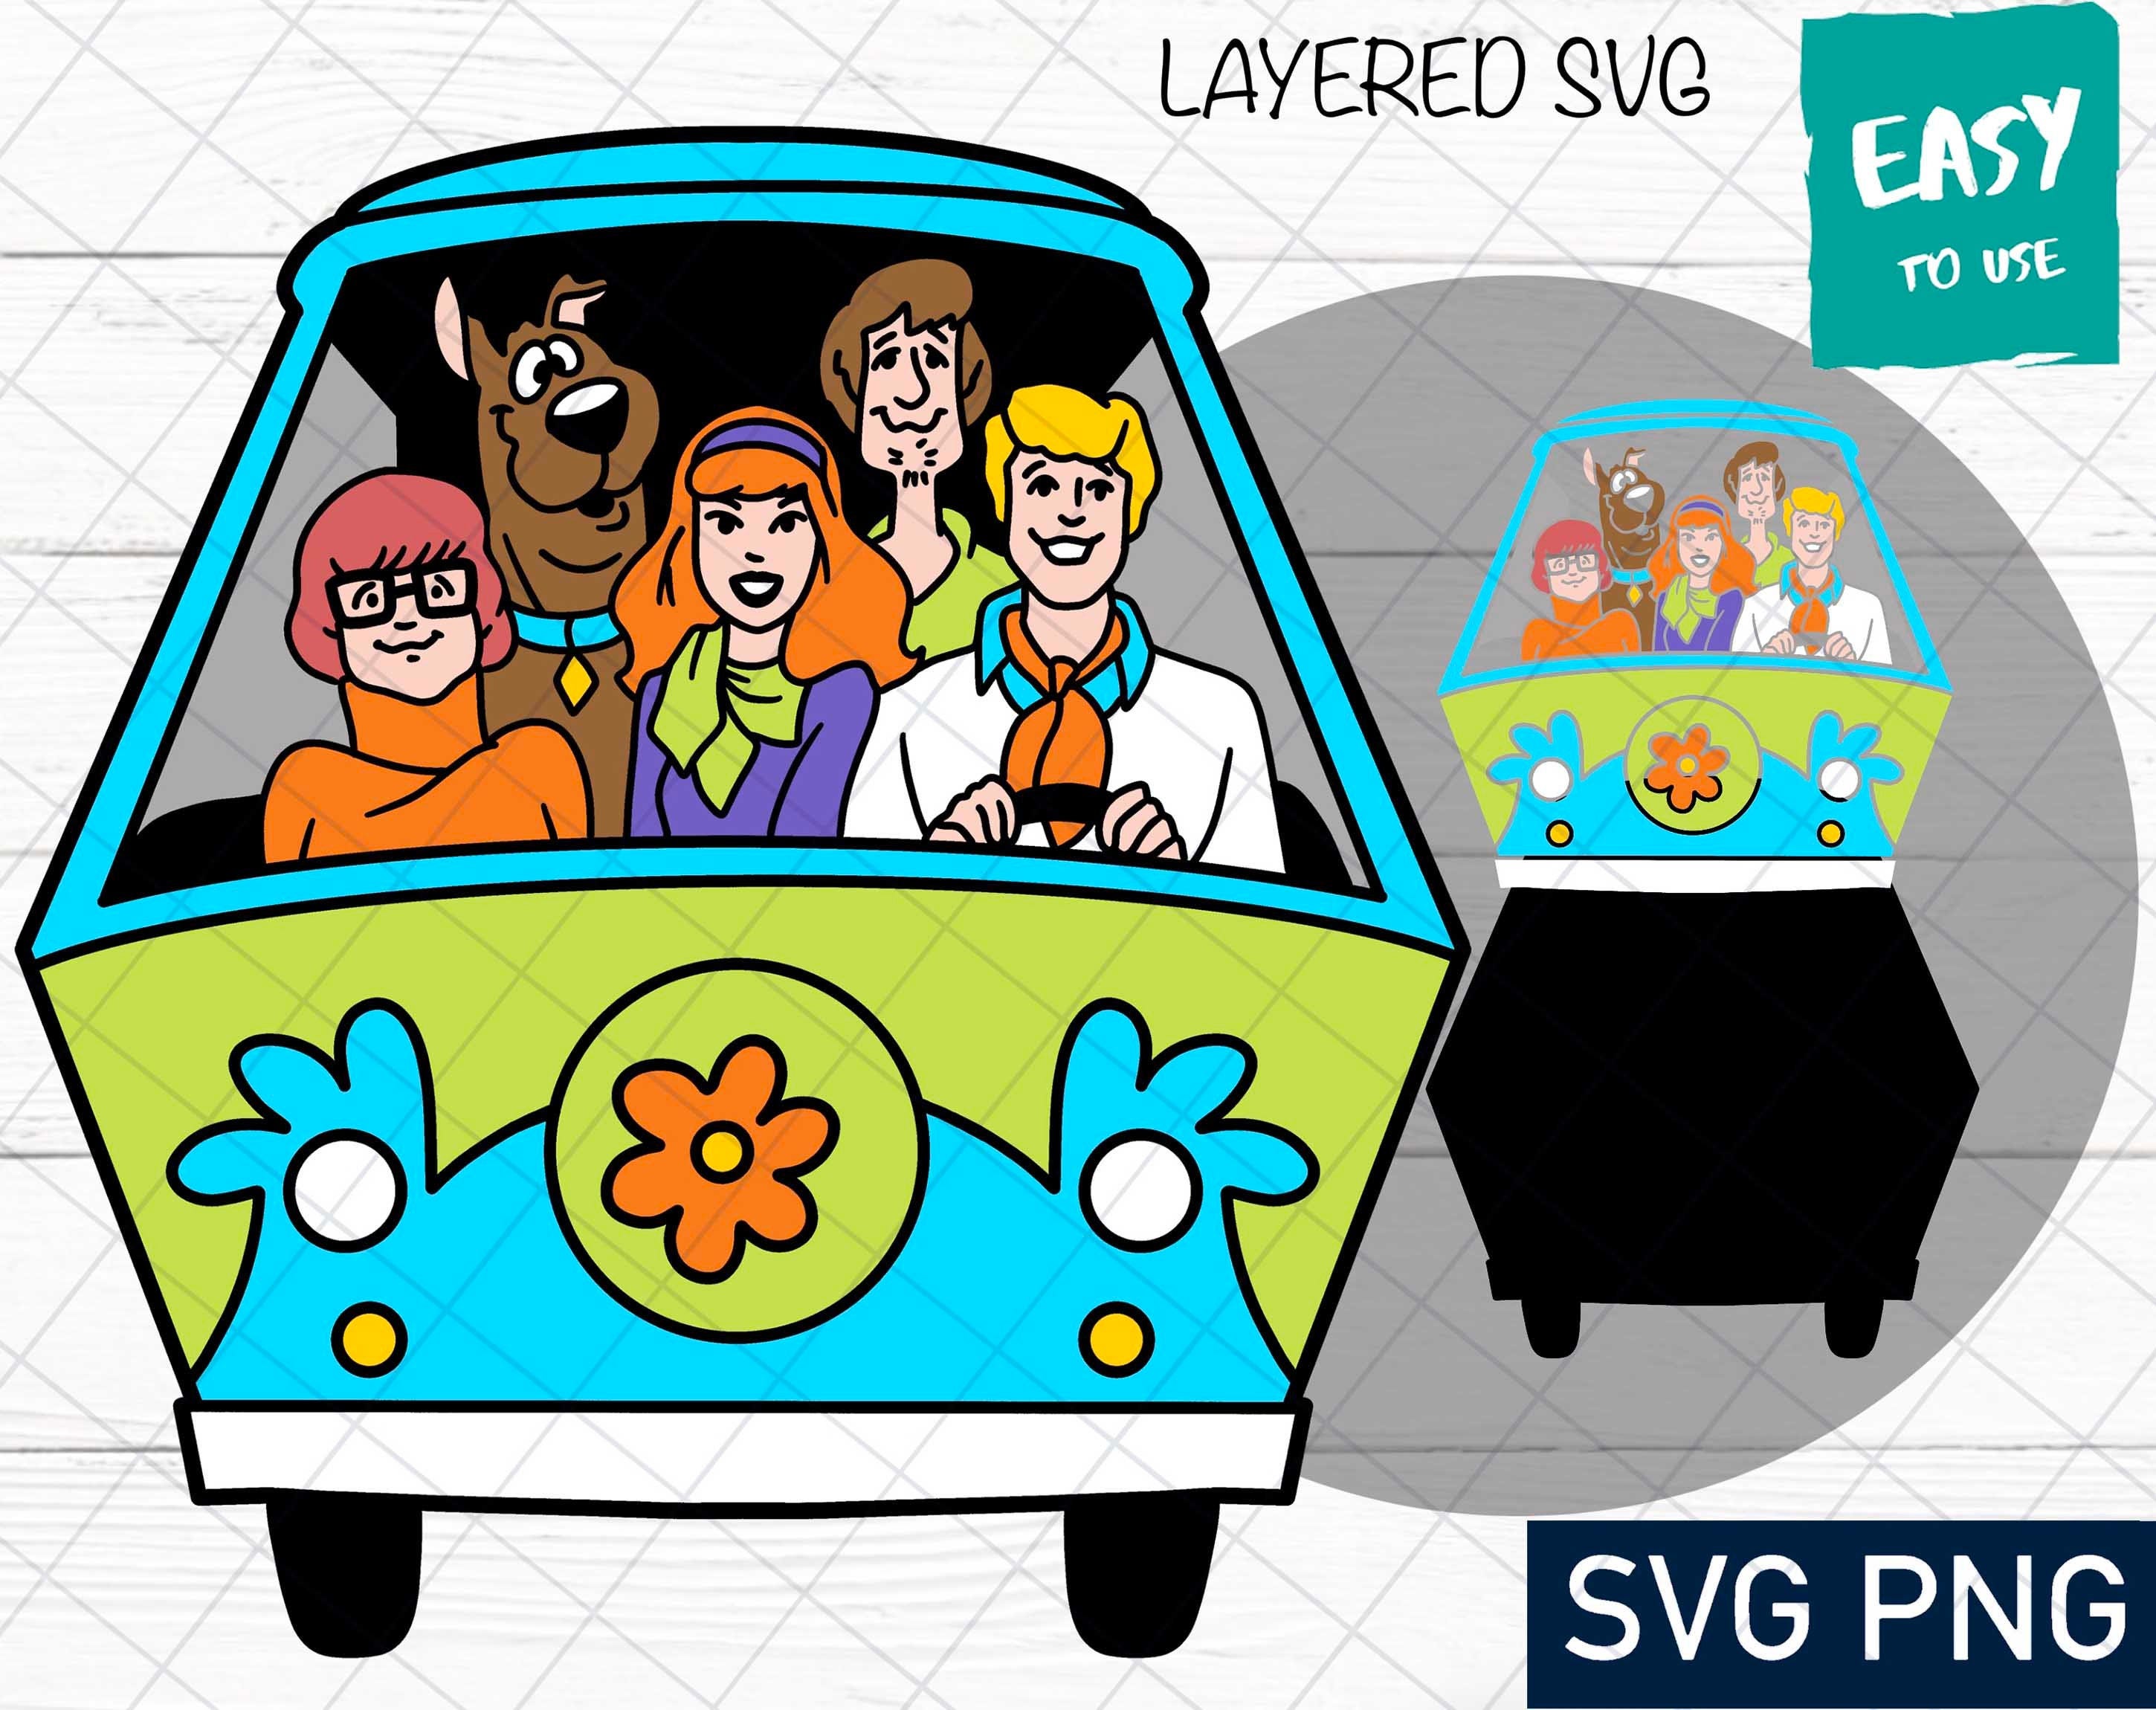 Bus with Friends SVG, Cricut svg, Clipart, Layered SVG, Files for Cricut, Cut files, Silhouette, T Shirt svg png, dog svg